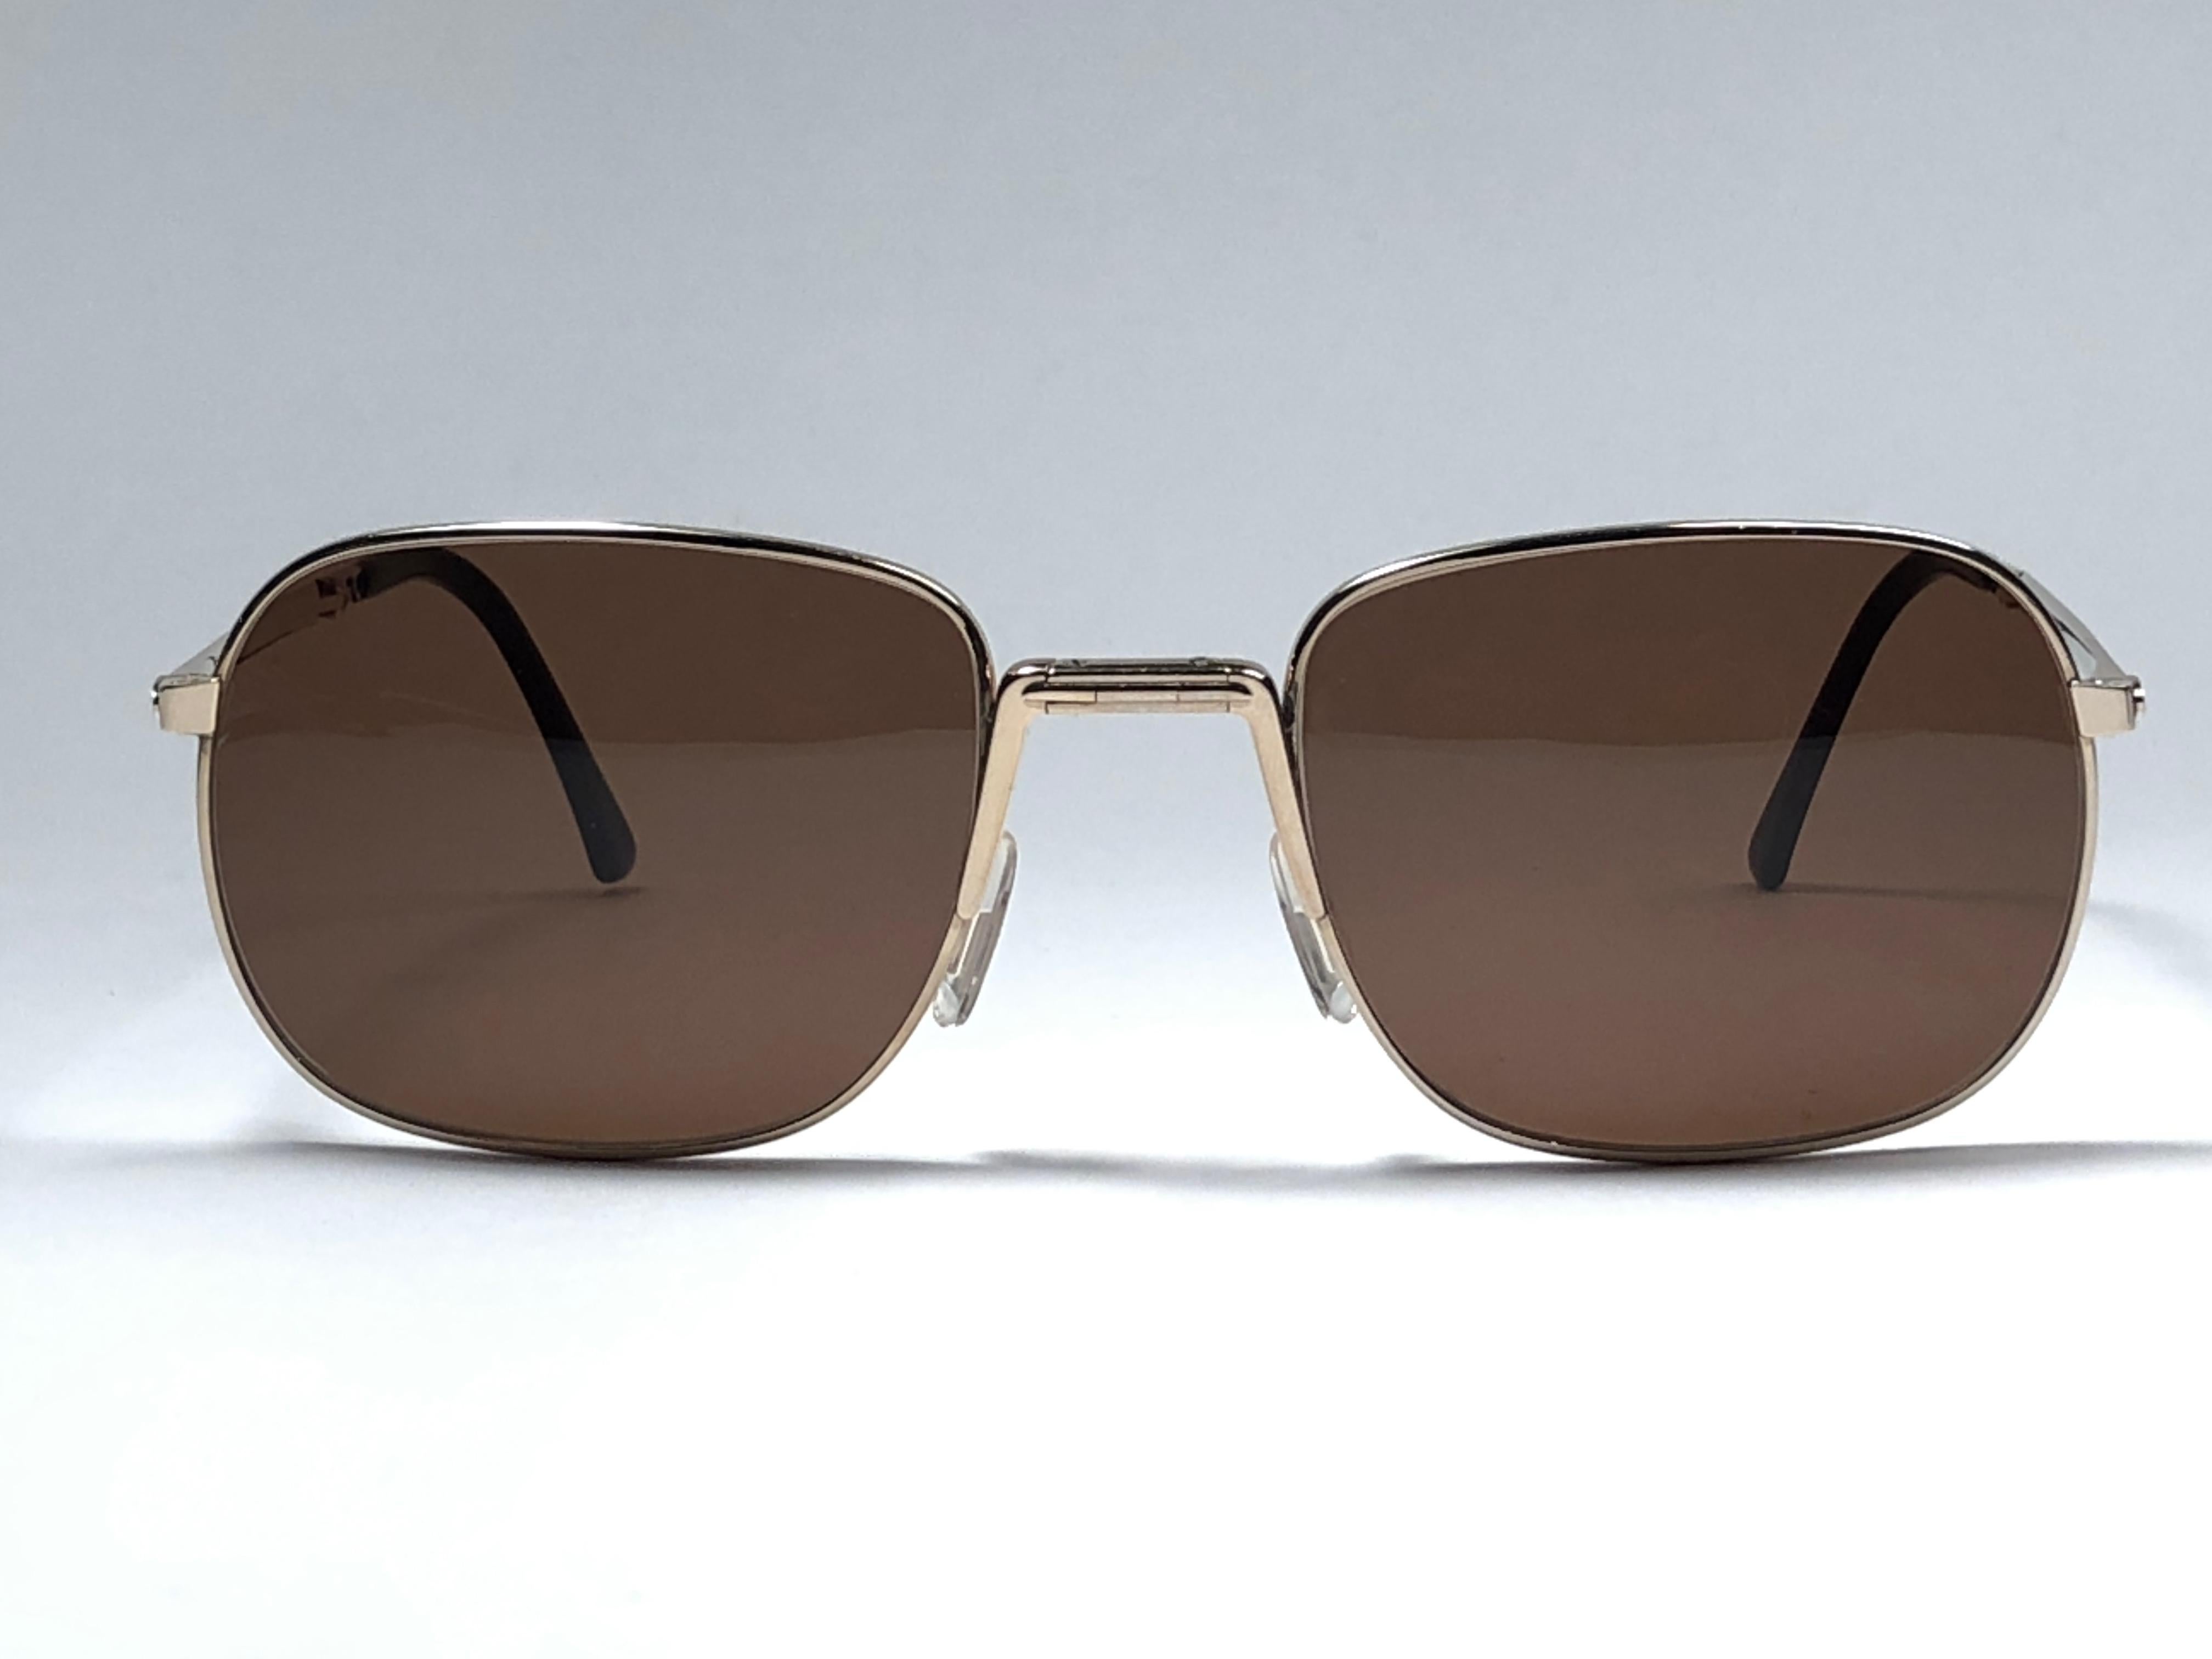 New vintage Christian Dior Monsieur folding sunglasses. .

Spotless brown lenses.

Comes with it original CD Monsieur sleeve.

New, never worn or displayed this item may show light sign of wear due to storage.

Made in Austria

FRONT 13.5 CMS
LENS